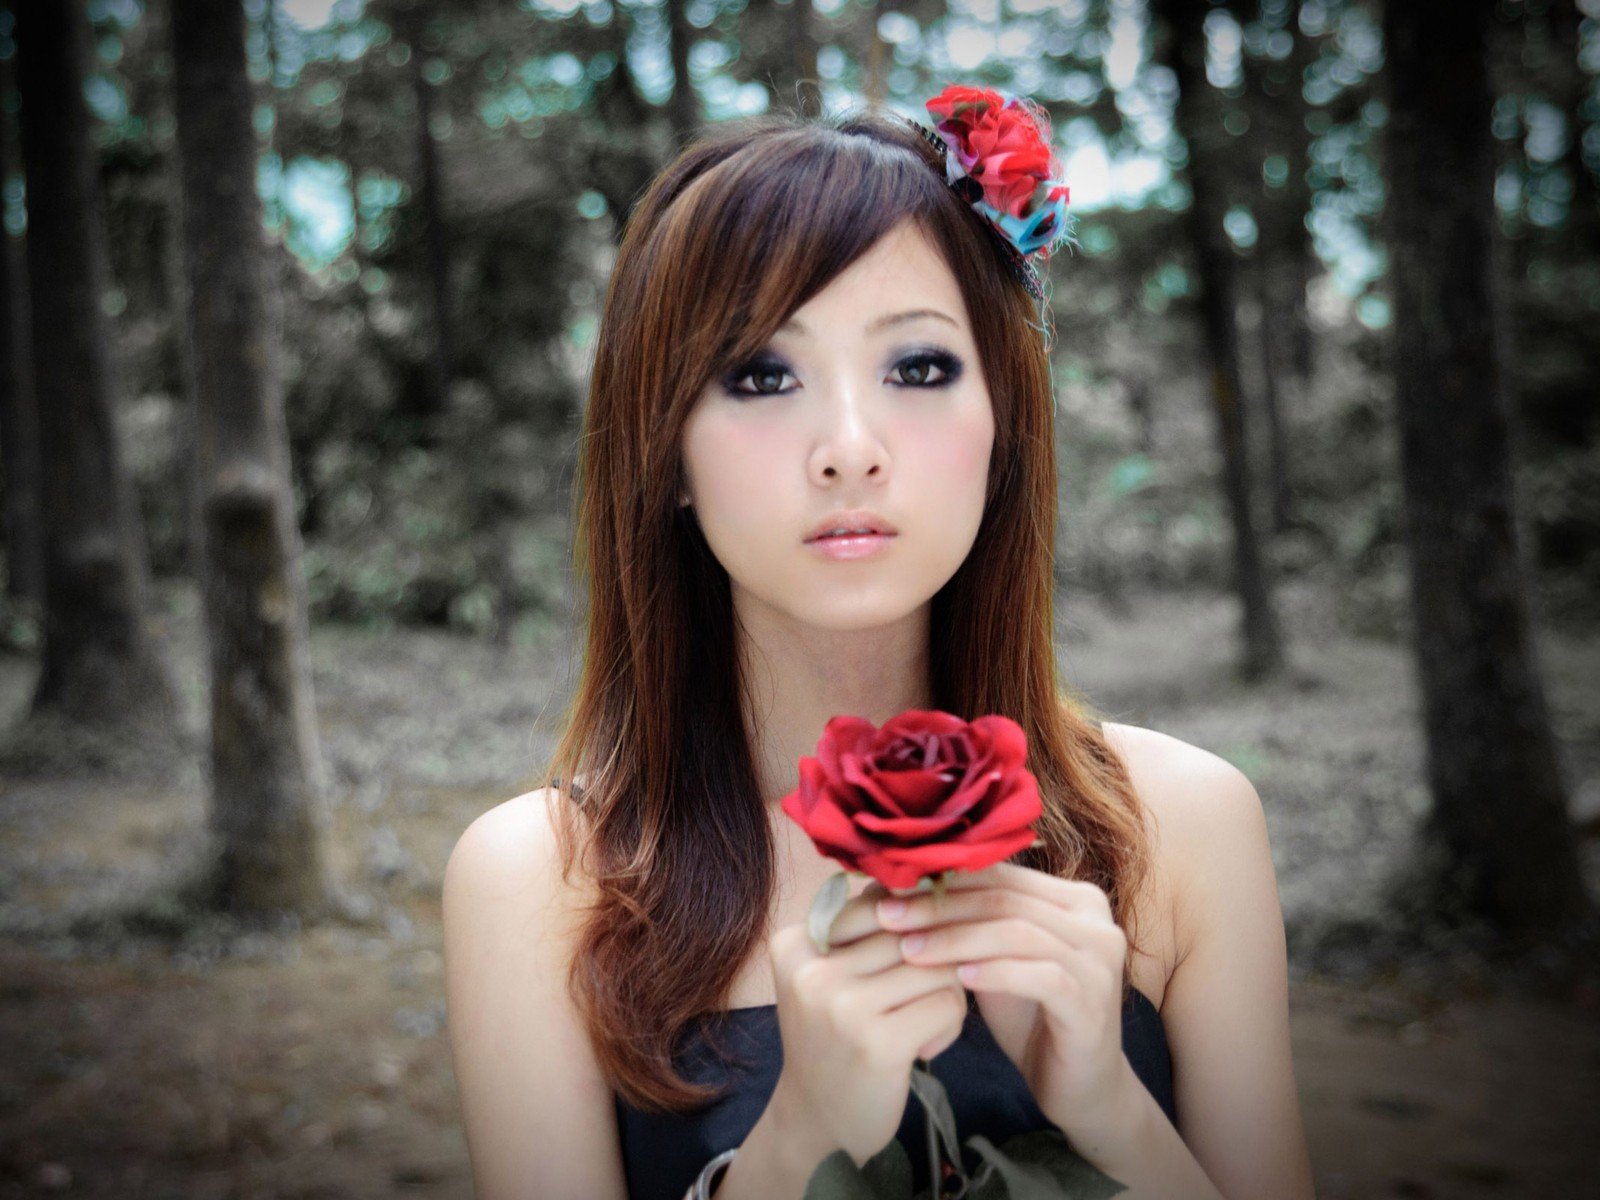 brunettes, Women, Forests, Asians, Roses, Blurred, Mikako, Zhang, Kaijie Wallpaper